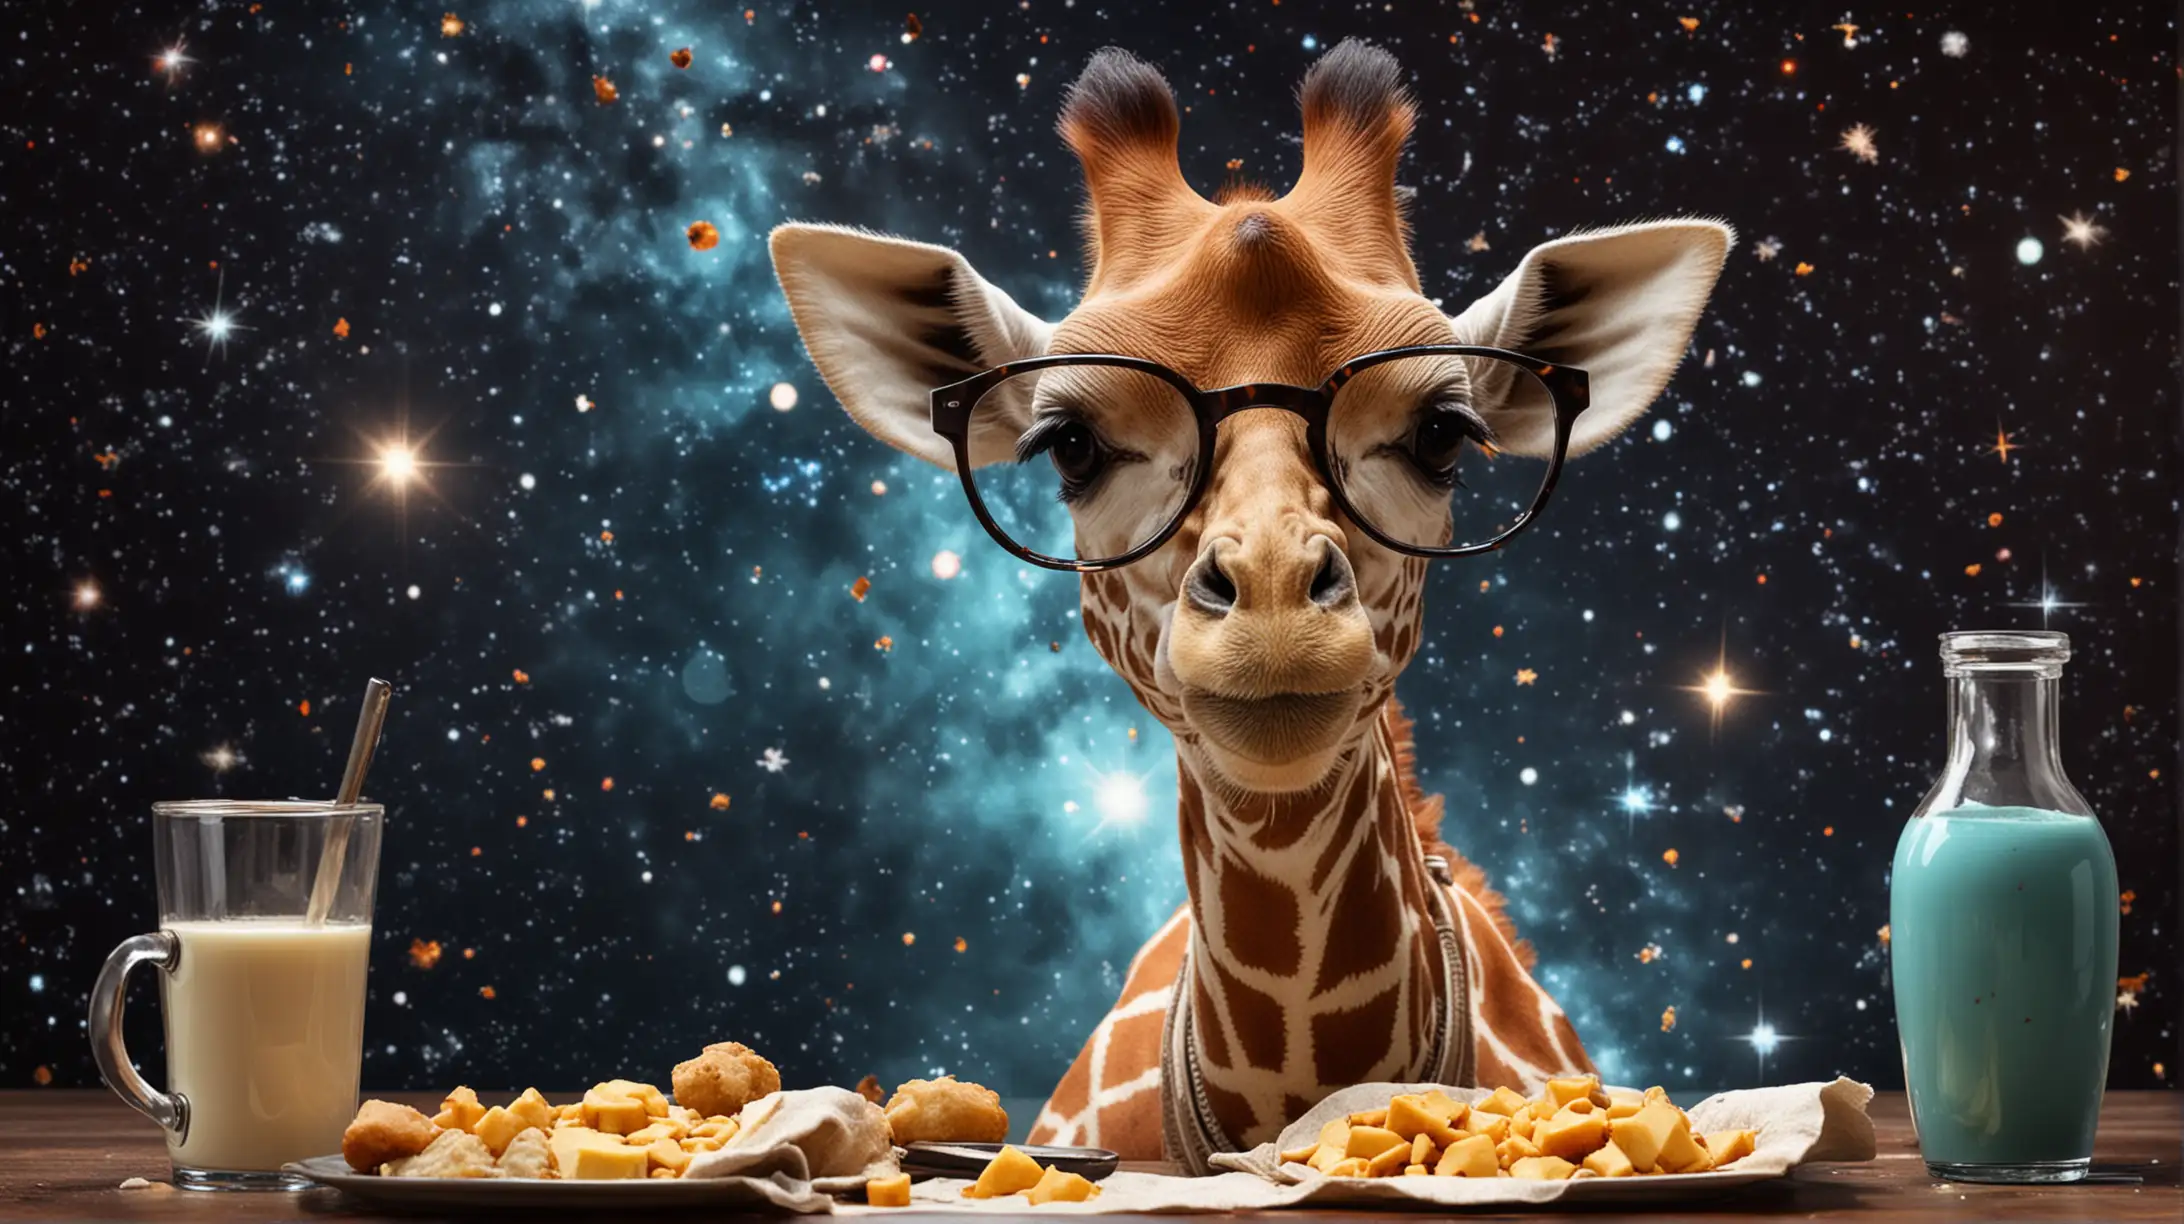 Adorable Baby Giraffe in Space Cooking Adventure